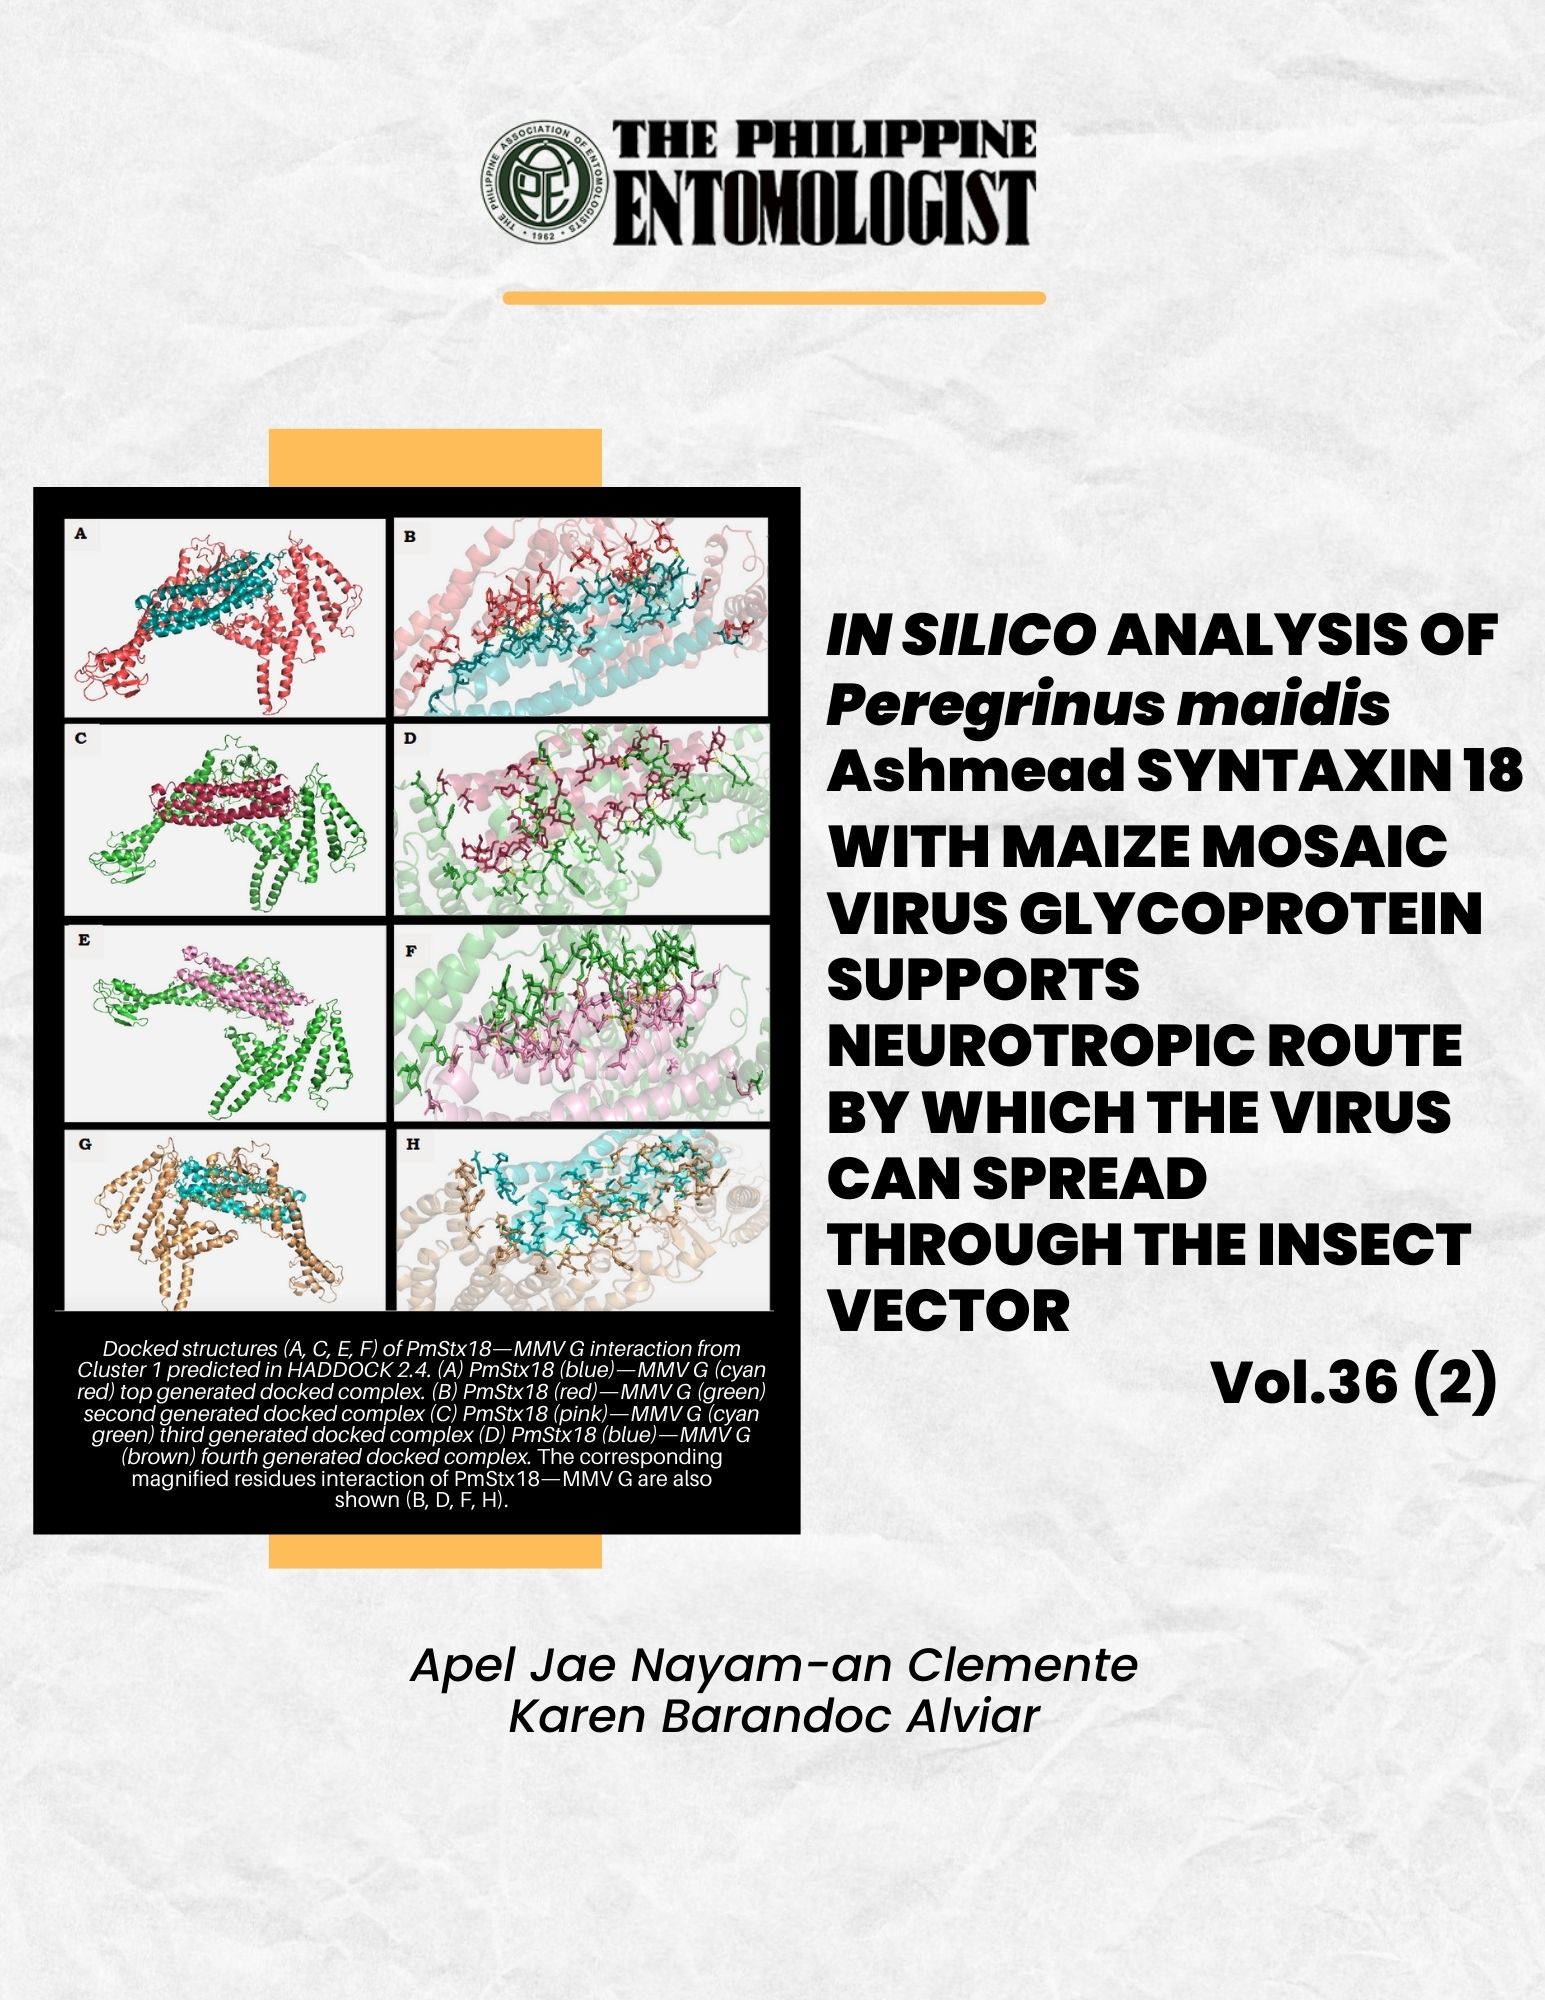 IN SILICO ANALYSIS OF Peregrinus maidis Ashmead SYNTAXIN 18 WITH MAIZE MOSAIC VIRUS GLYCOPROTEIN SUPPORTS NEUROTROPIC ROUTE BY WHICH THE VIRUS CAN SPREAD THROUGH THE INSECT VECTOR